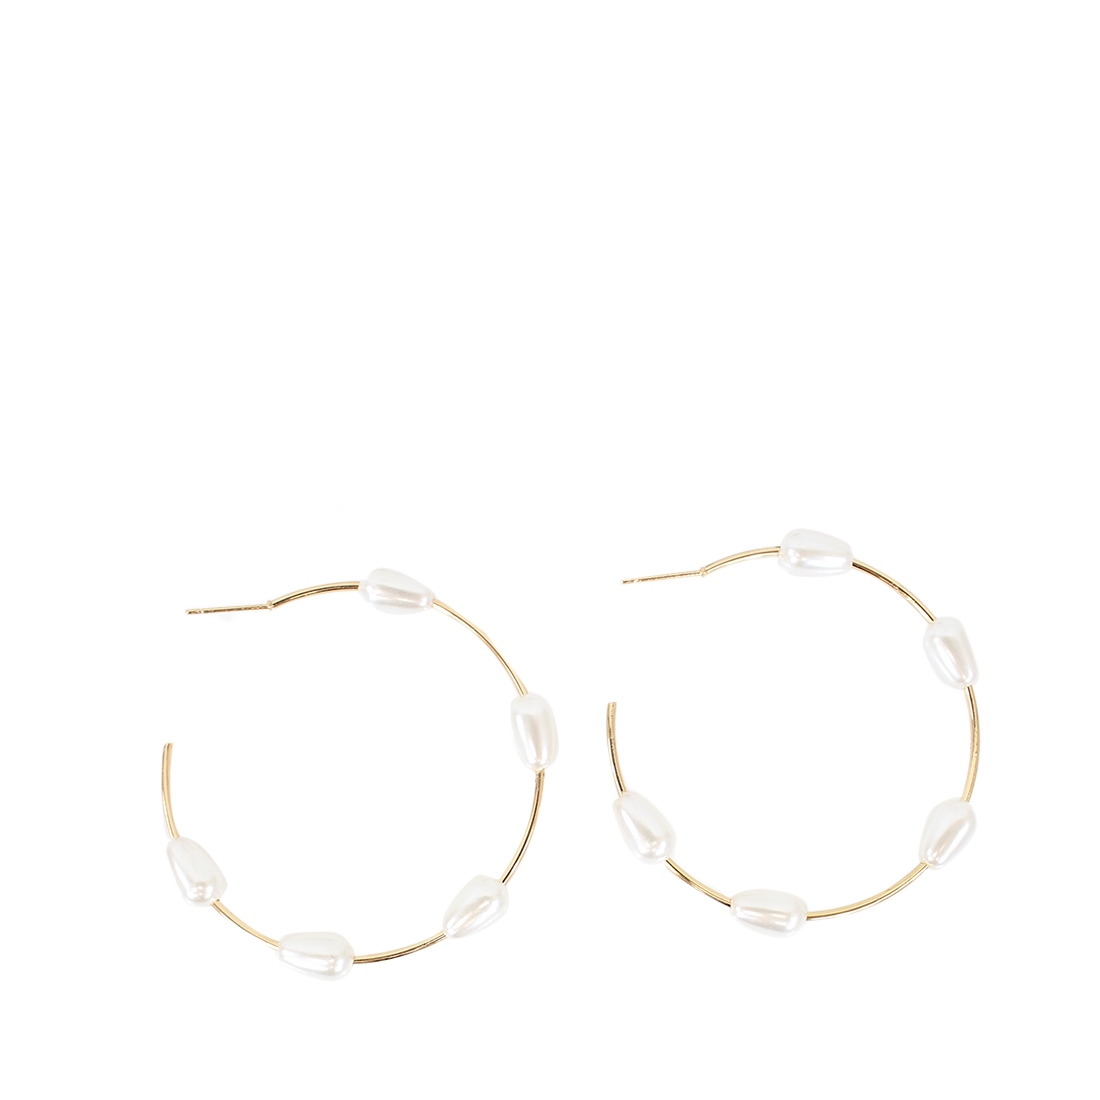 Thin hoops with pearls